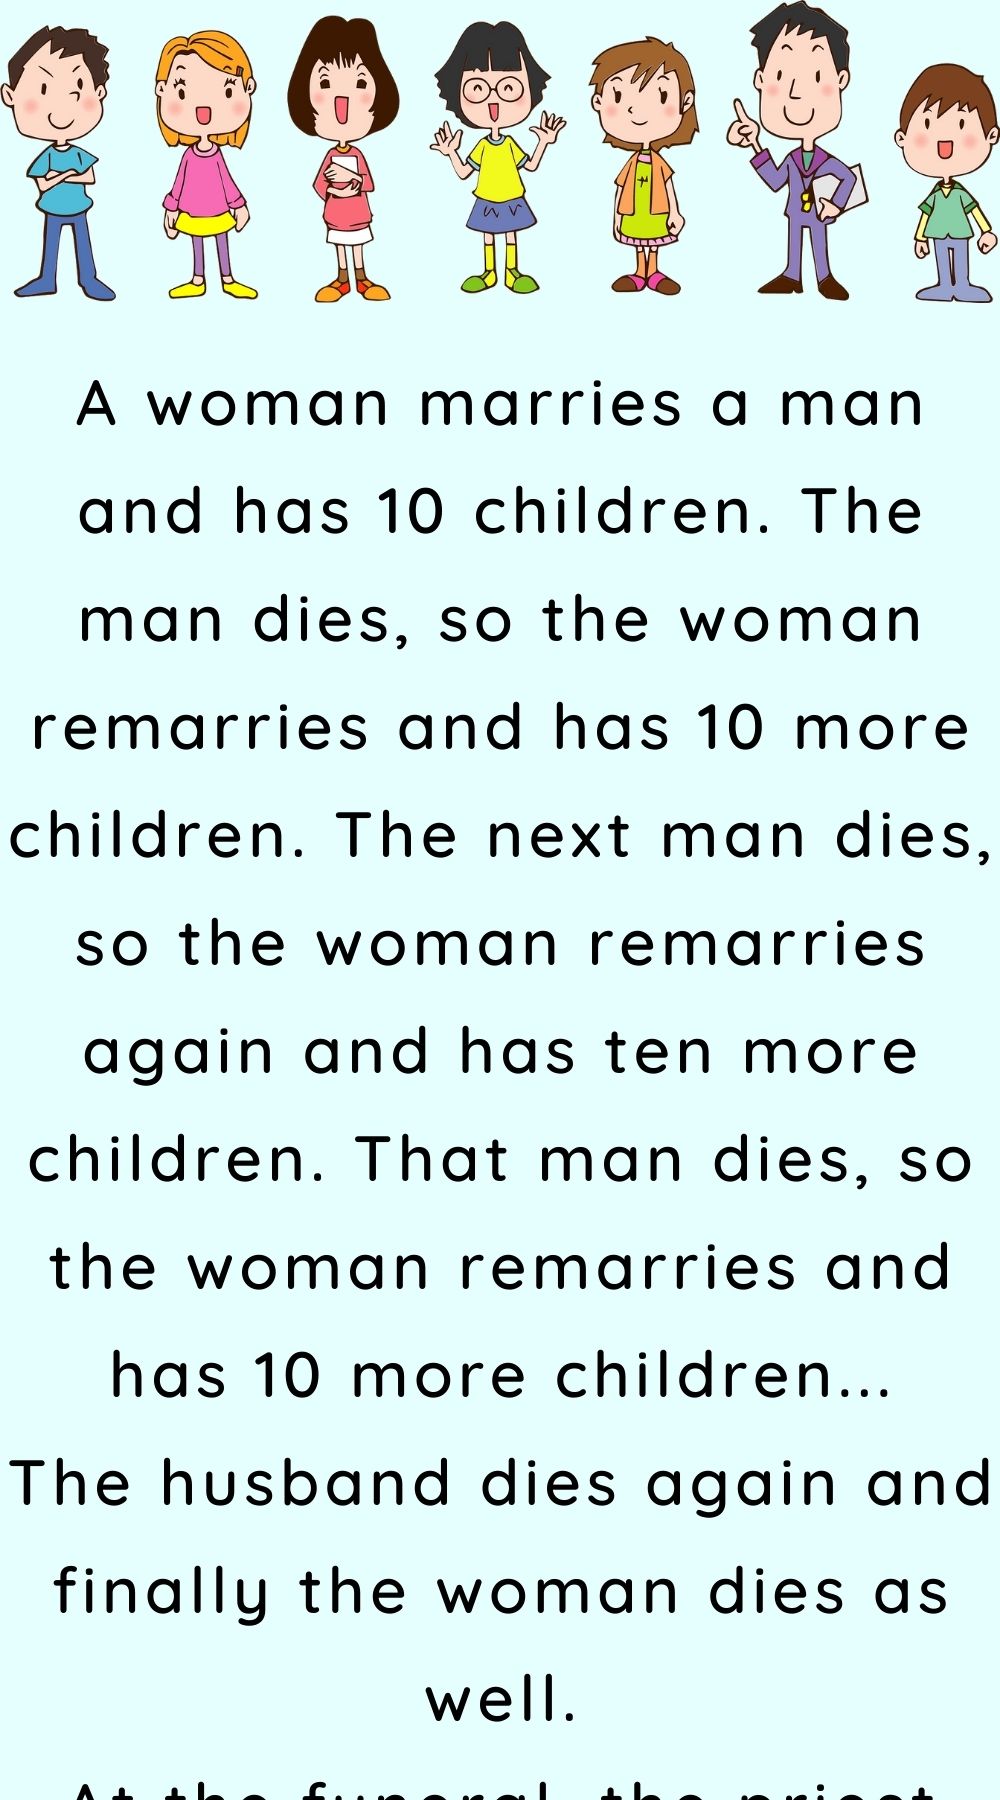 A woman marries a man and has 10 children